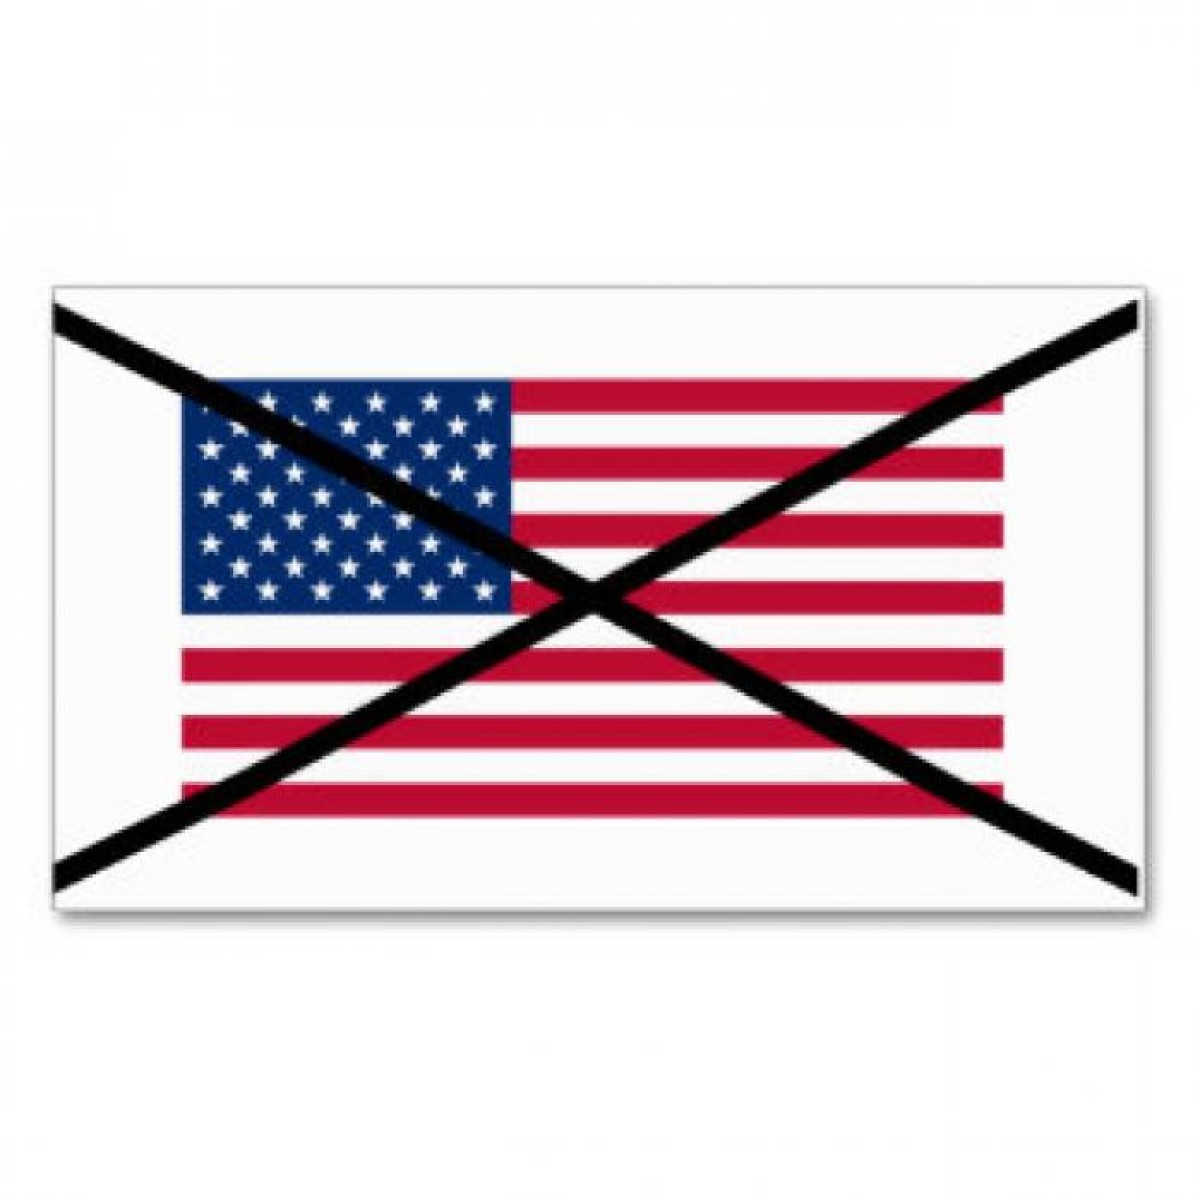 flag of the united states crossed out business card r37239efe145e4037a3cb3b1ca997204b i579t 8byvr 324